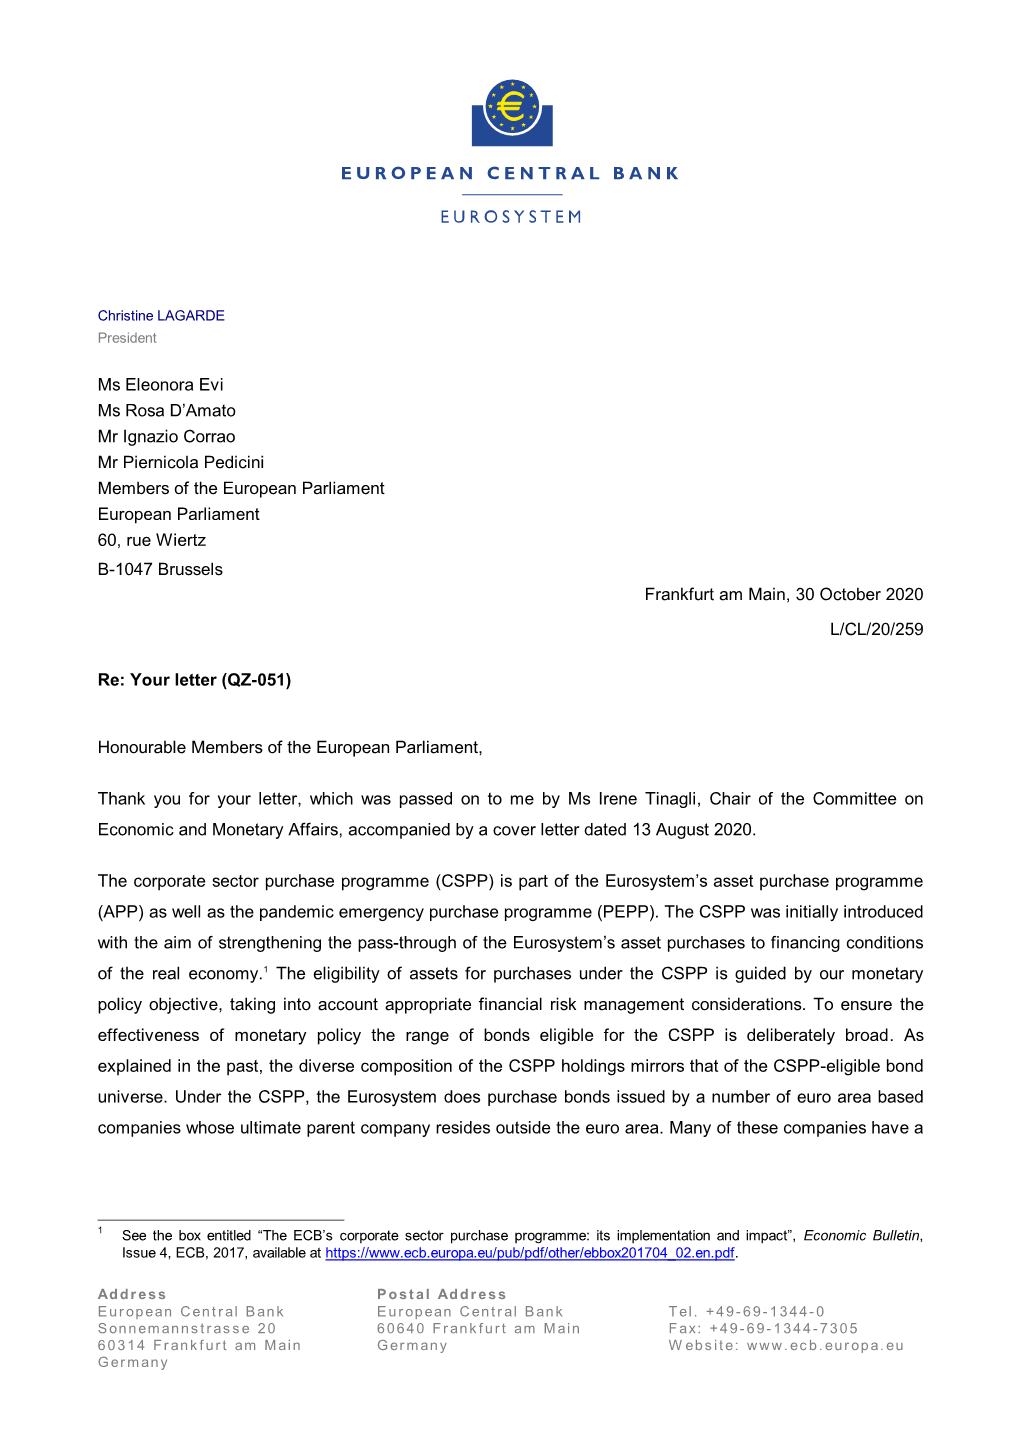 Letter from the ECB President to Ms Eleonora Evi, Ms Rosa D'amato, Mr